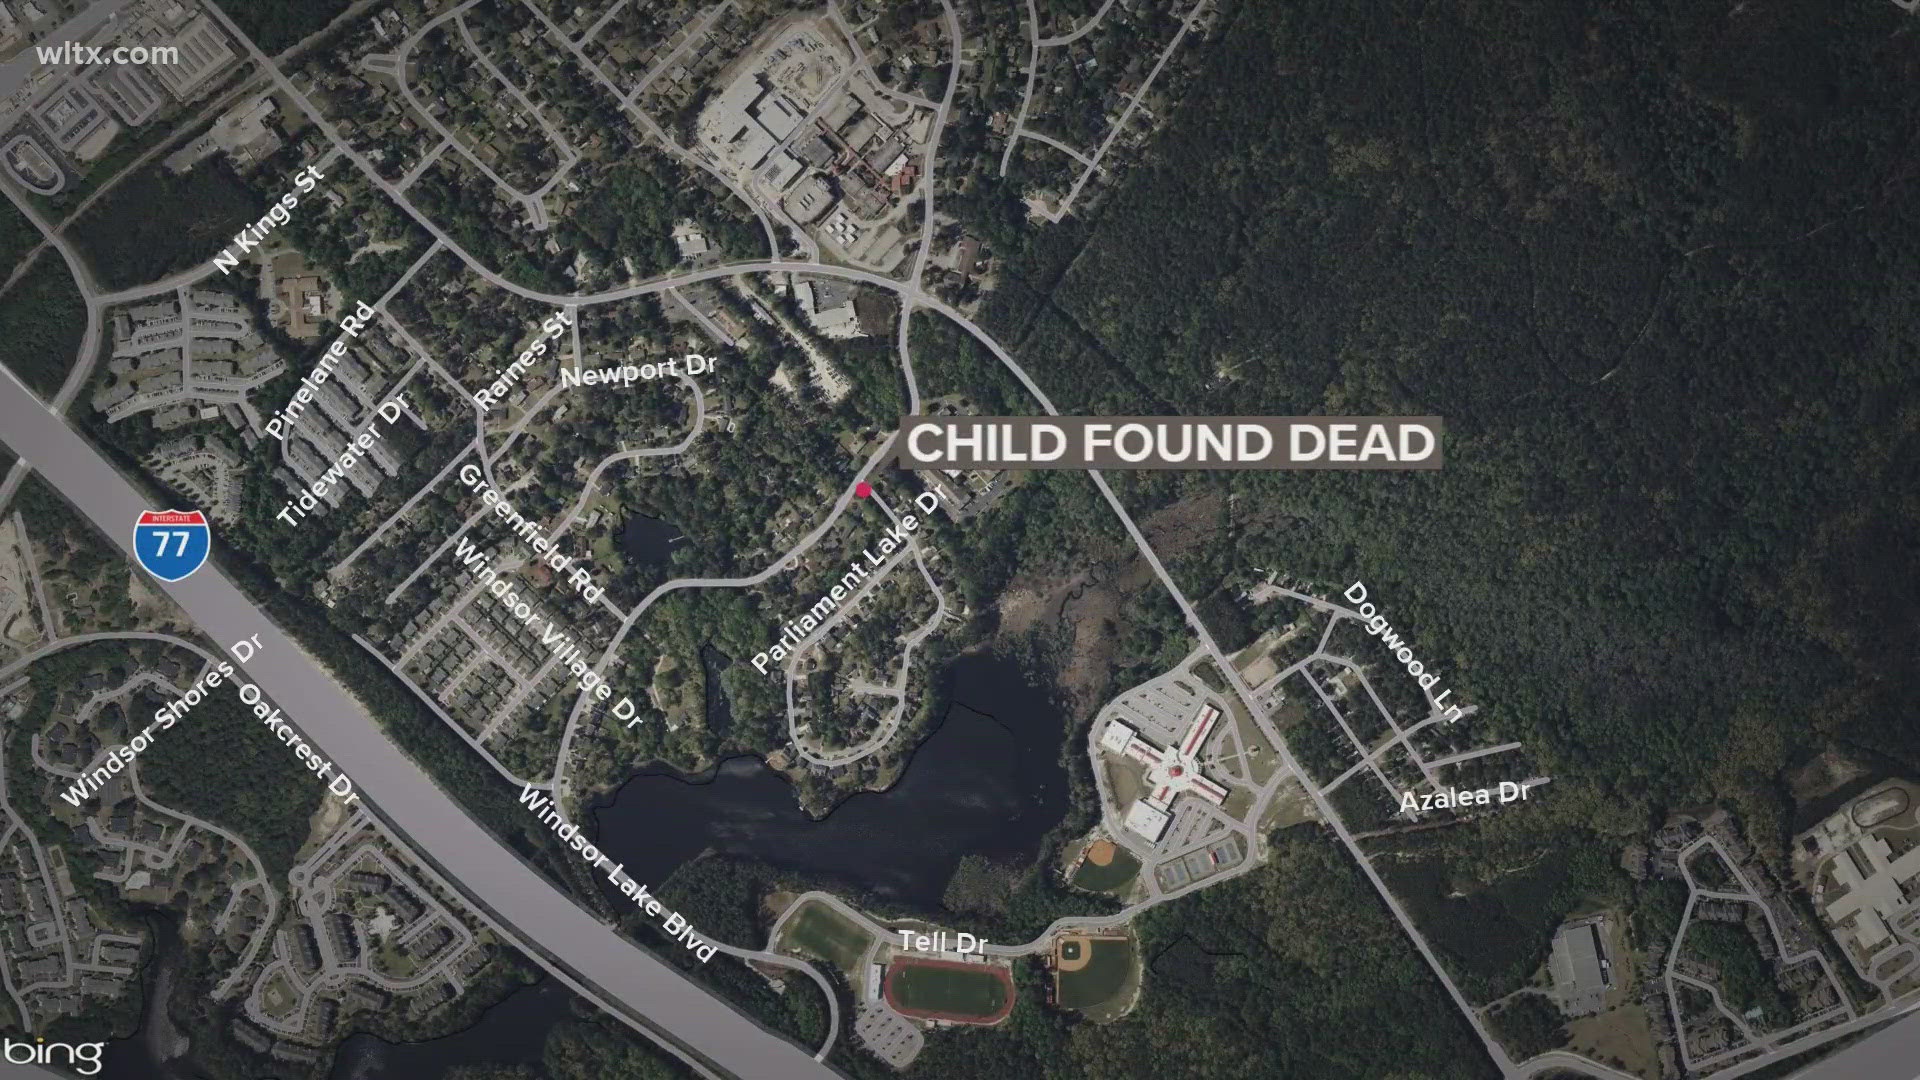 A 3-year-old child is dead after being found in a hot car. The child was initially reported missing on Friday afternoon, officials say.